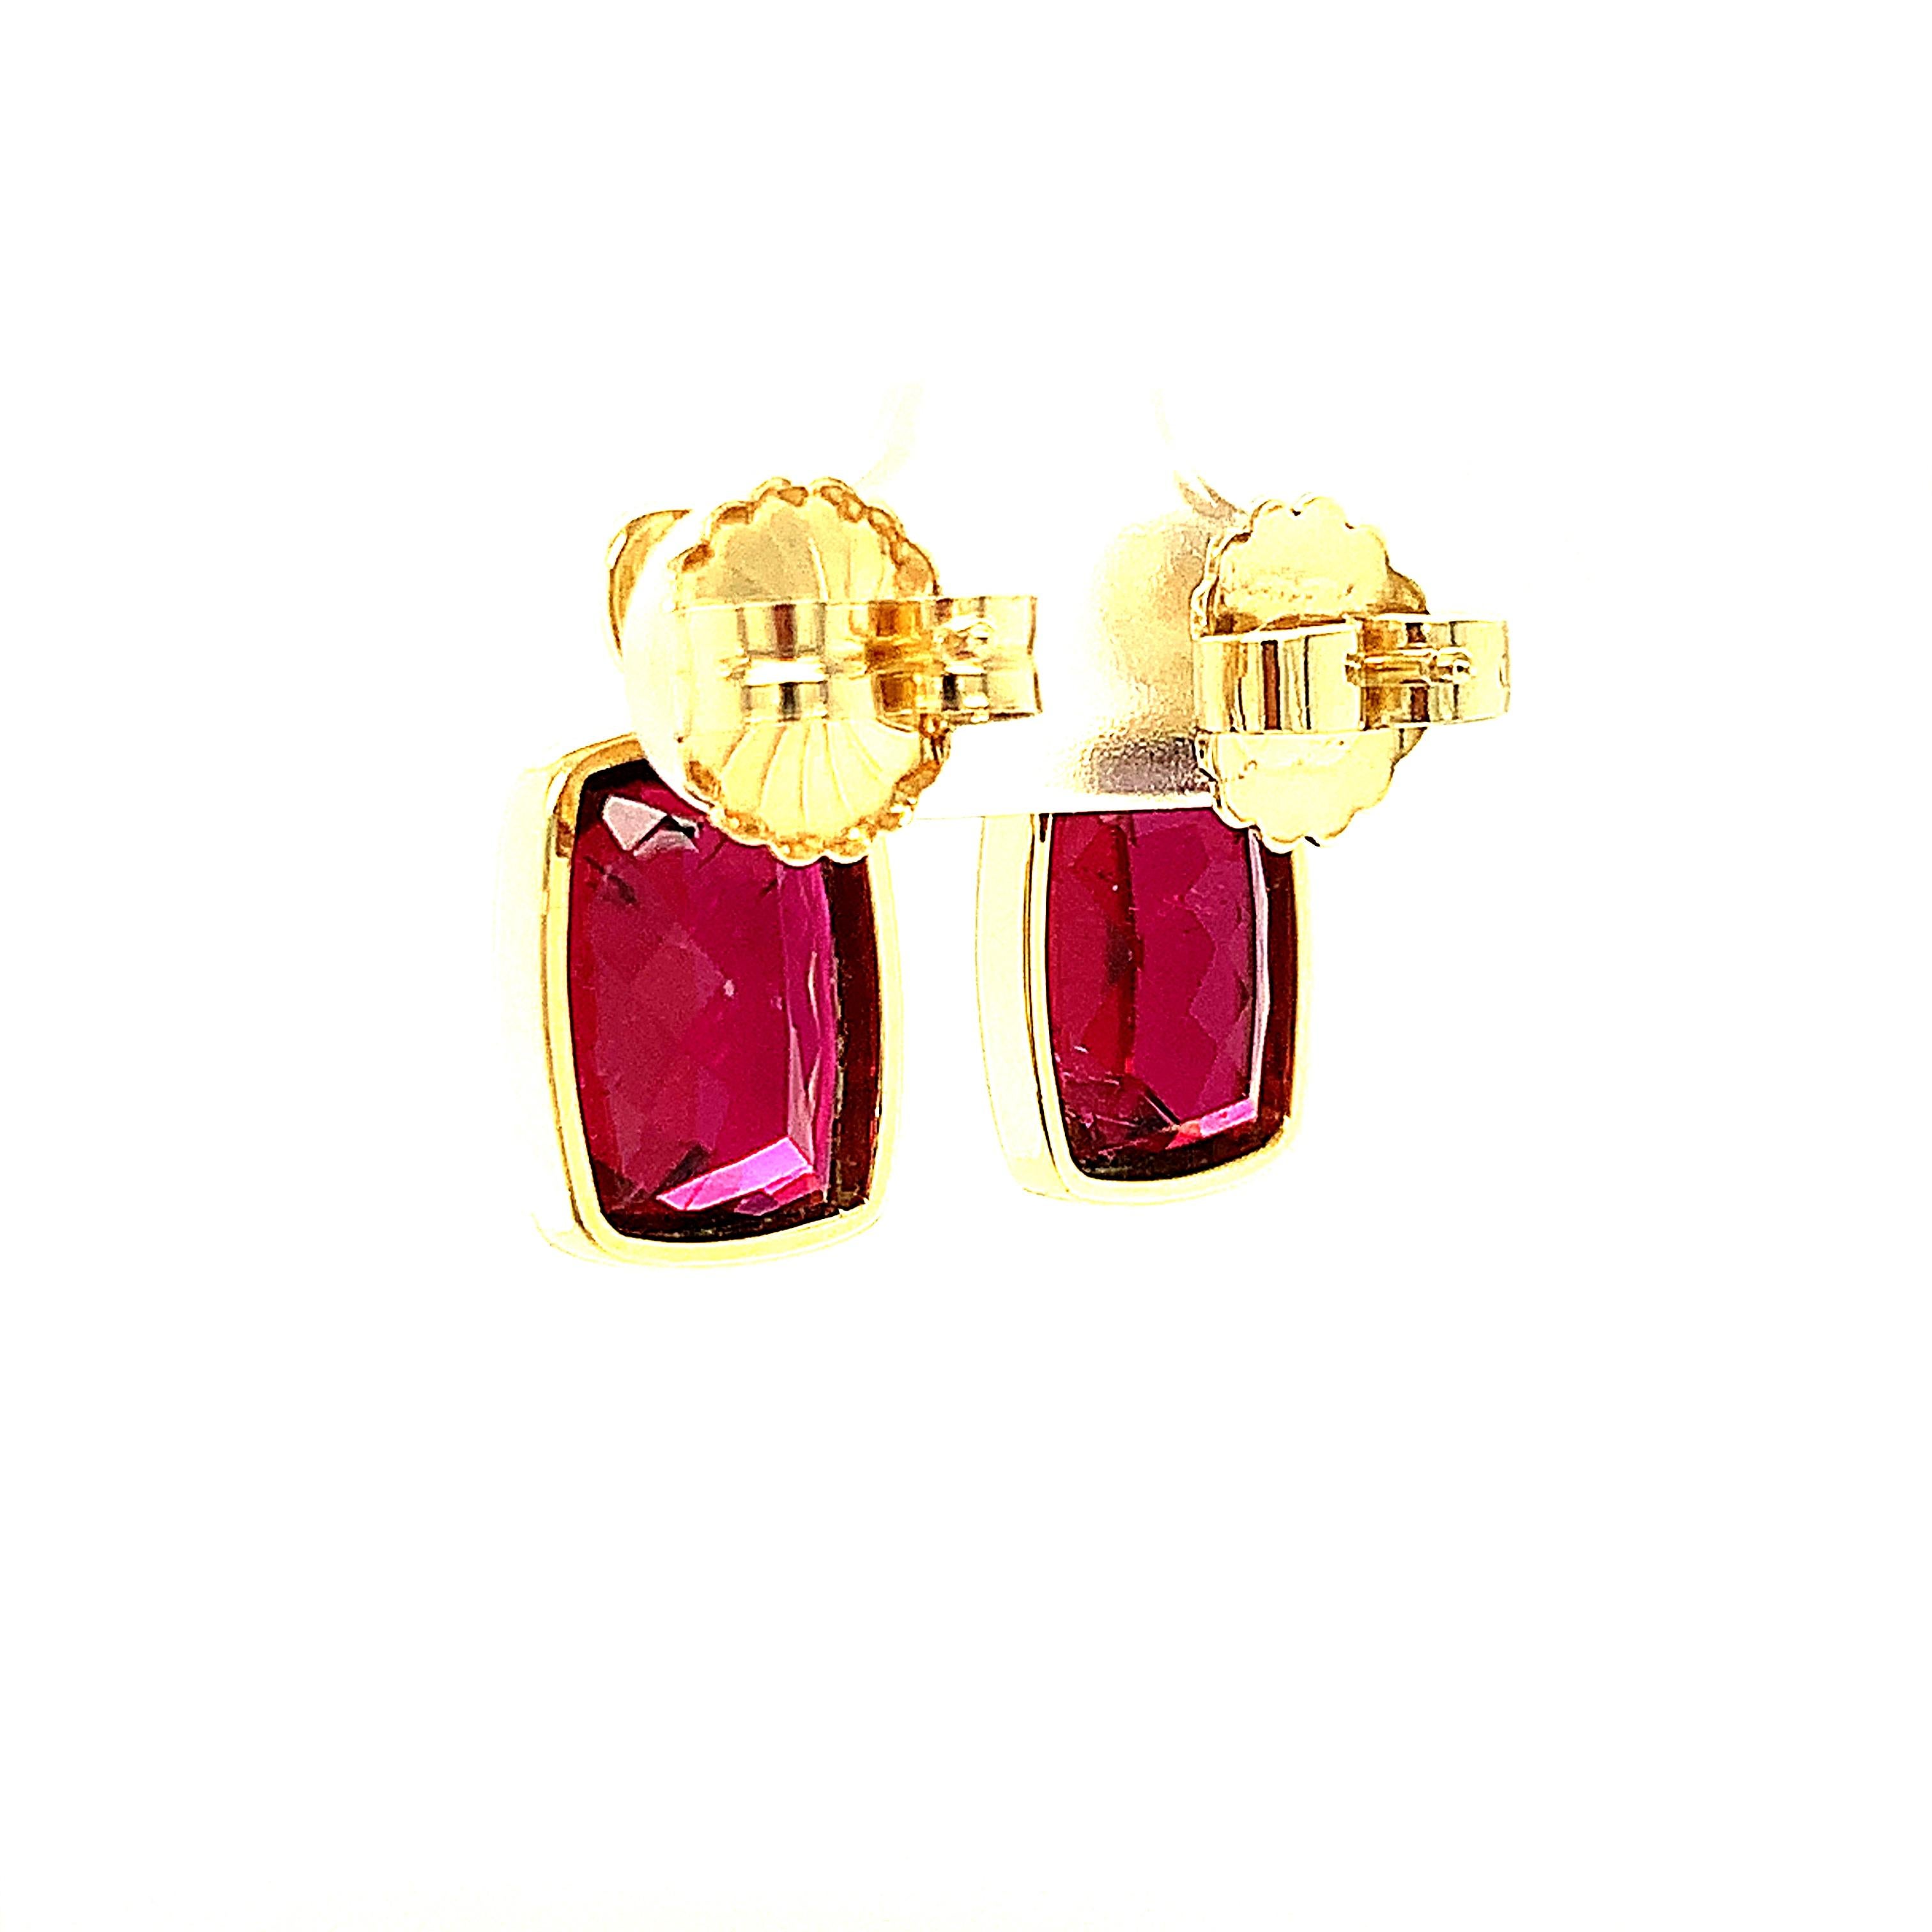 Rubellite Tourmaline Drop Earrings in Yellow Gold, 11.28 Carats Total  For Sale 1